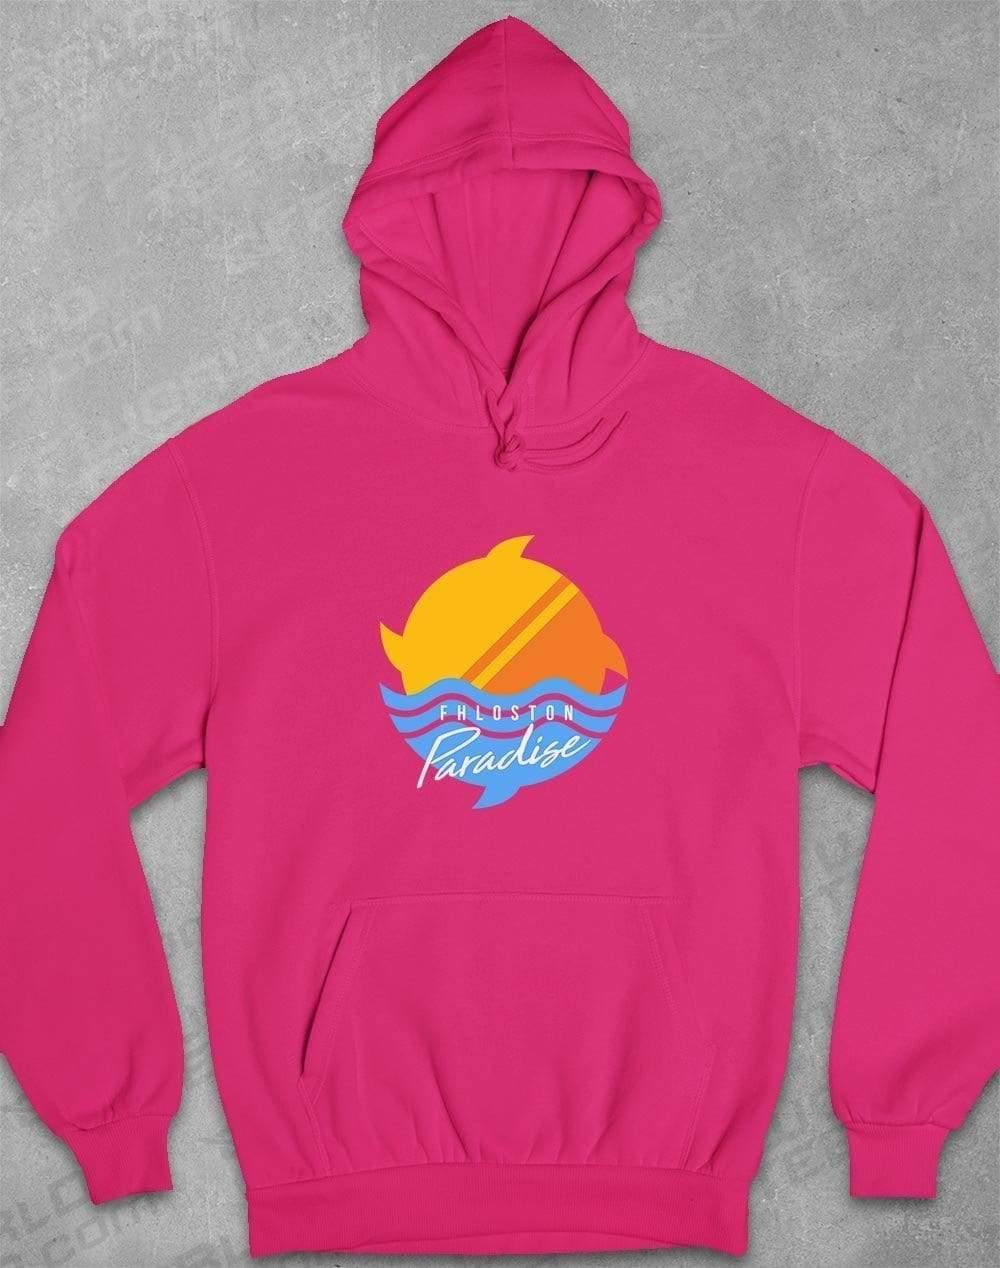 Fhloston Paradise Classic Hoodie S / Hot Pink  - Off World Tees